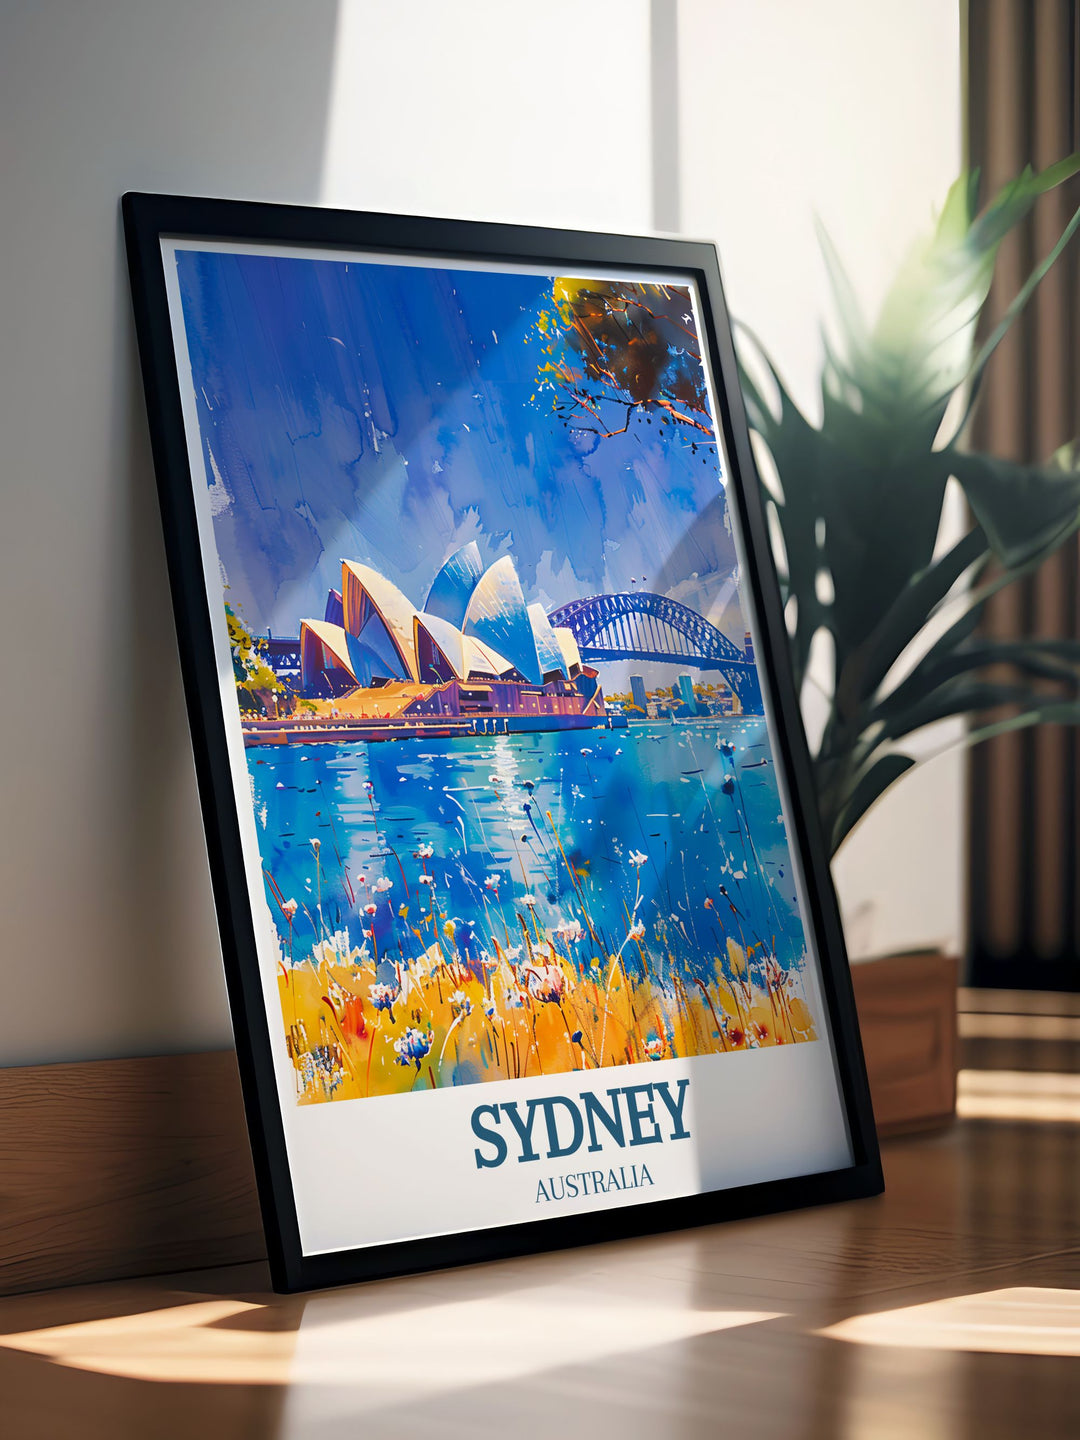 Stunning Sydney Harbour Bridge and Sydney Opera House illustration in a vintage style perfect for bringing the beauty of Australias iconic city into your home a unique and captivating addition to any art collection